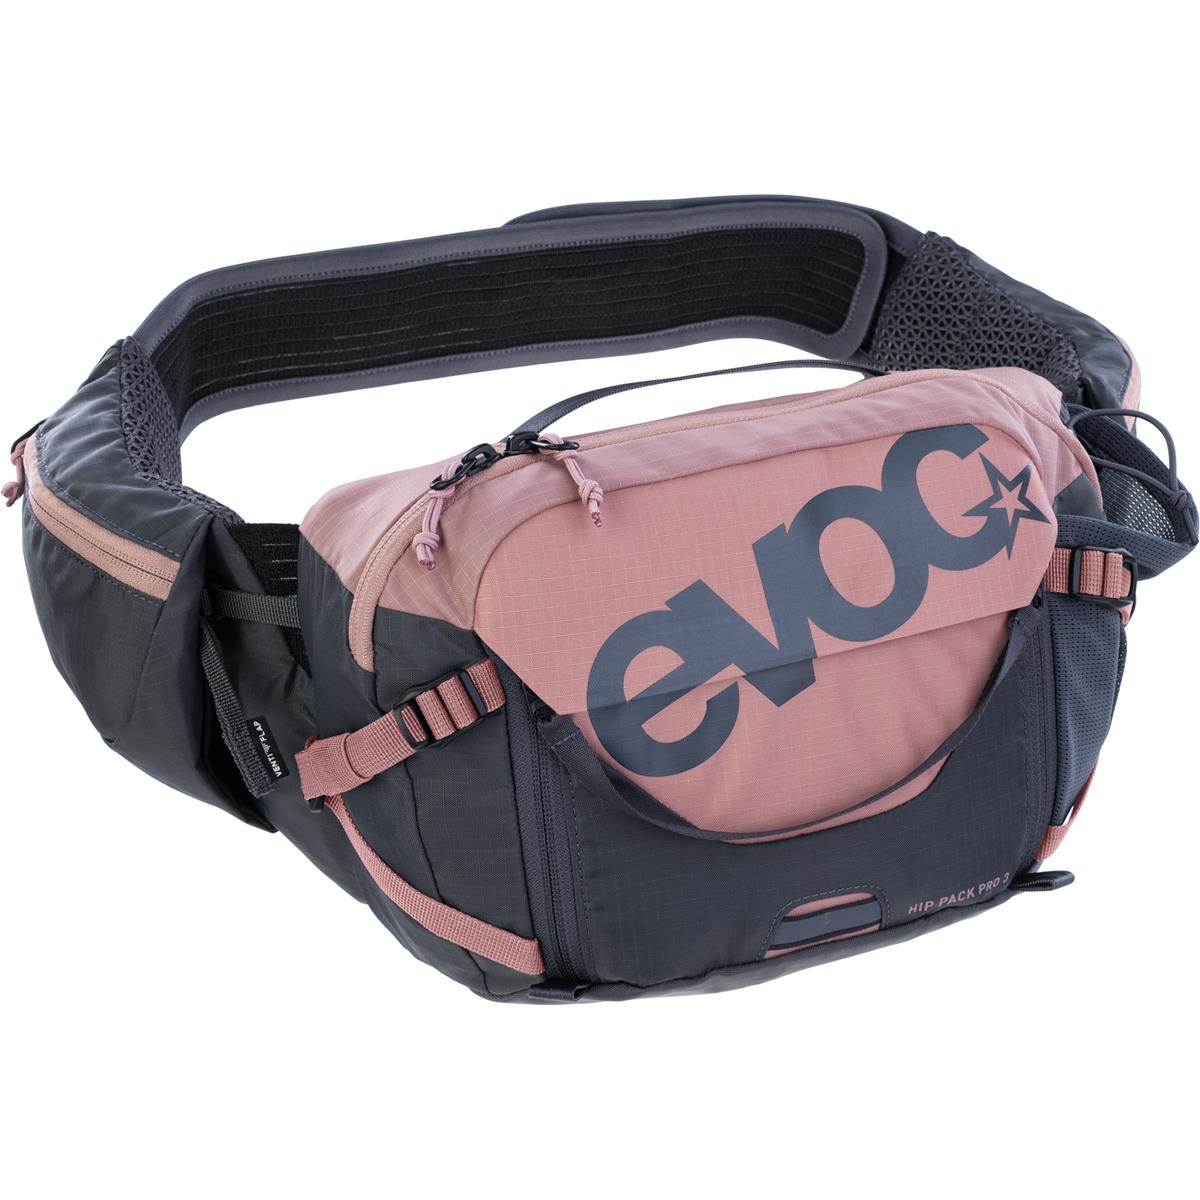 Evoc Hip Pack with Hydration System 1.5 Liters Hip Pack Pro 3 + Dusty Pink/Carbon Gray